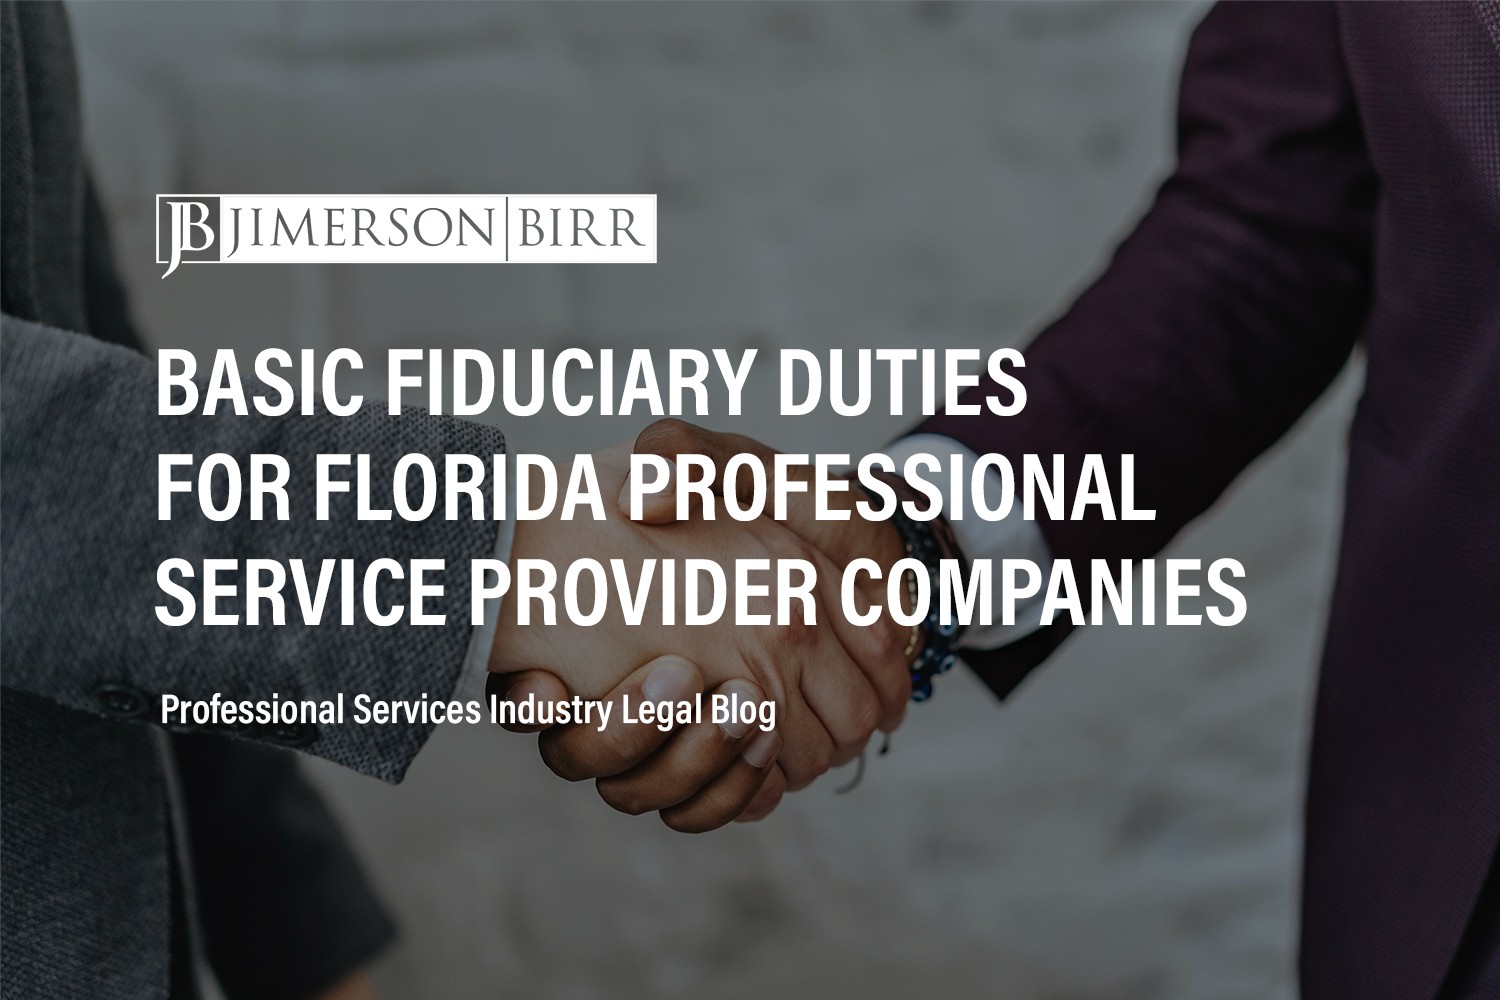 Basic Fiduciary Duties Owed in Florida Professional Service Provider Companies